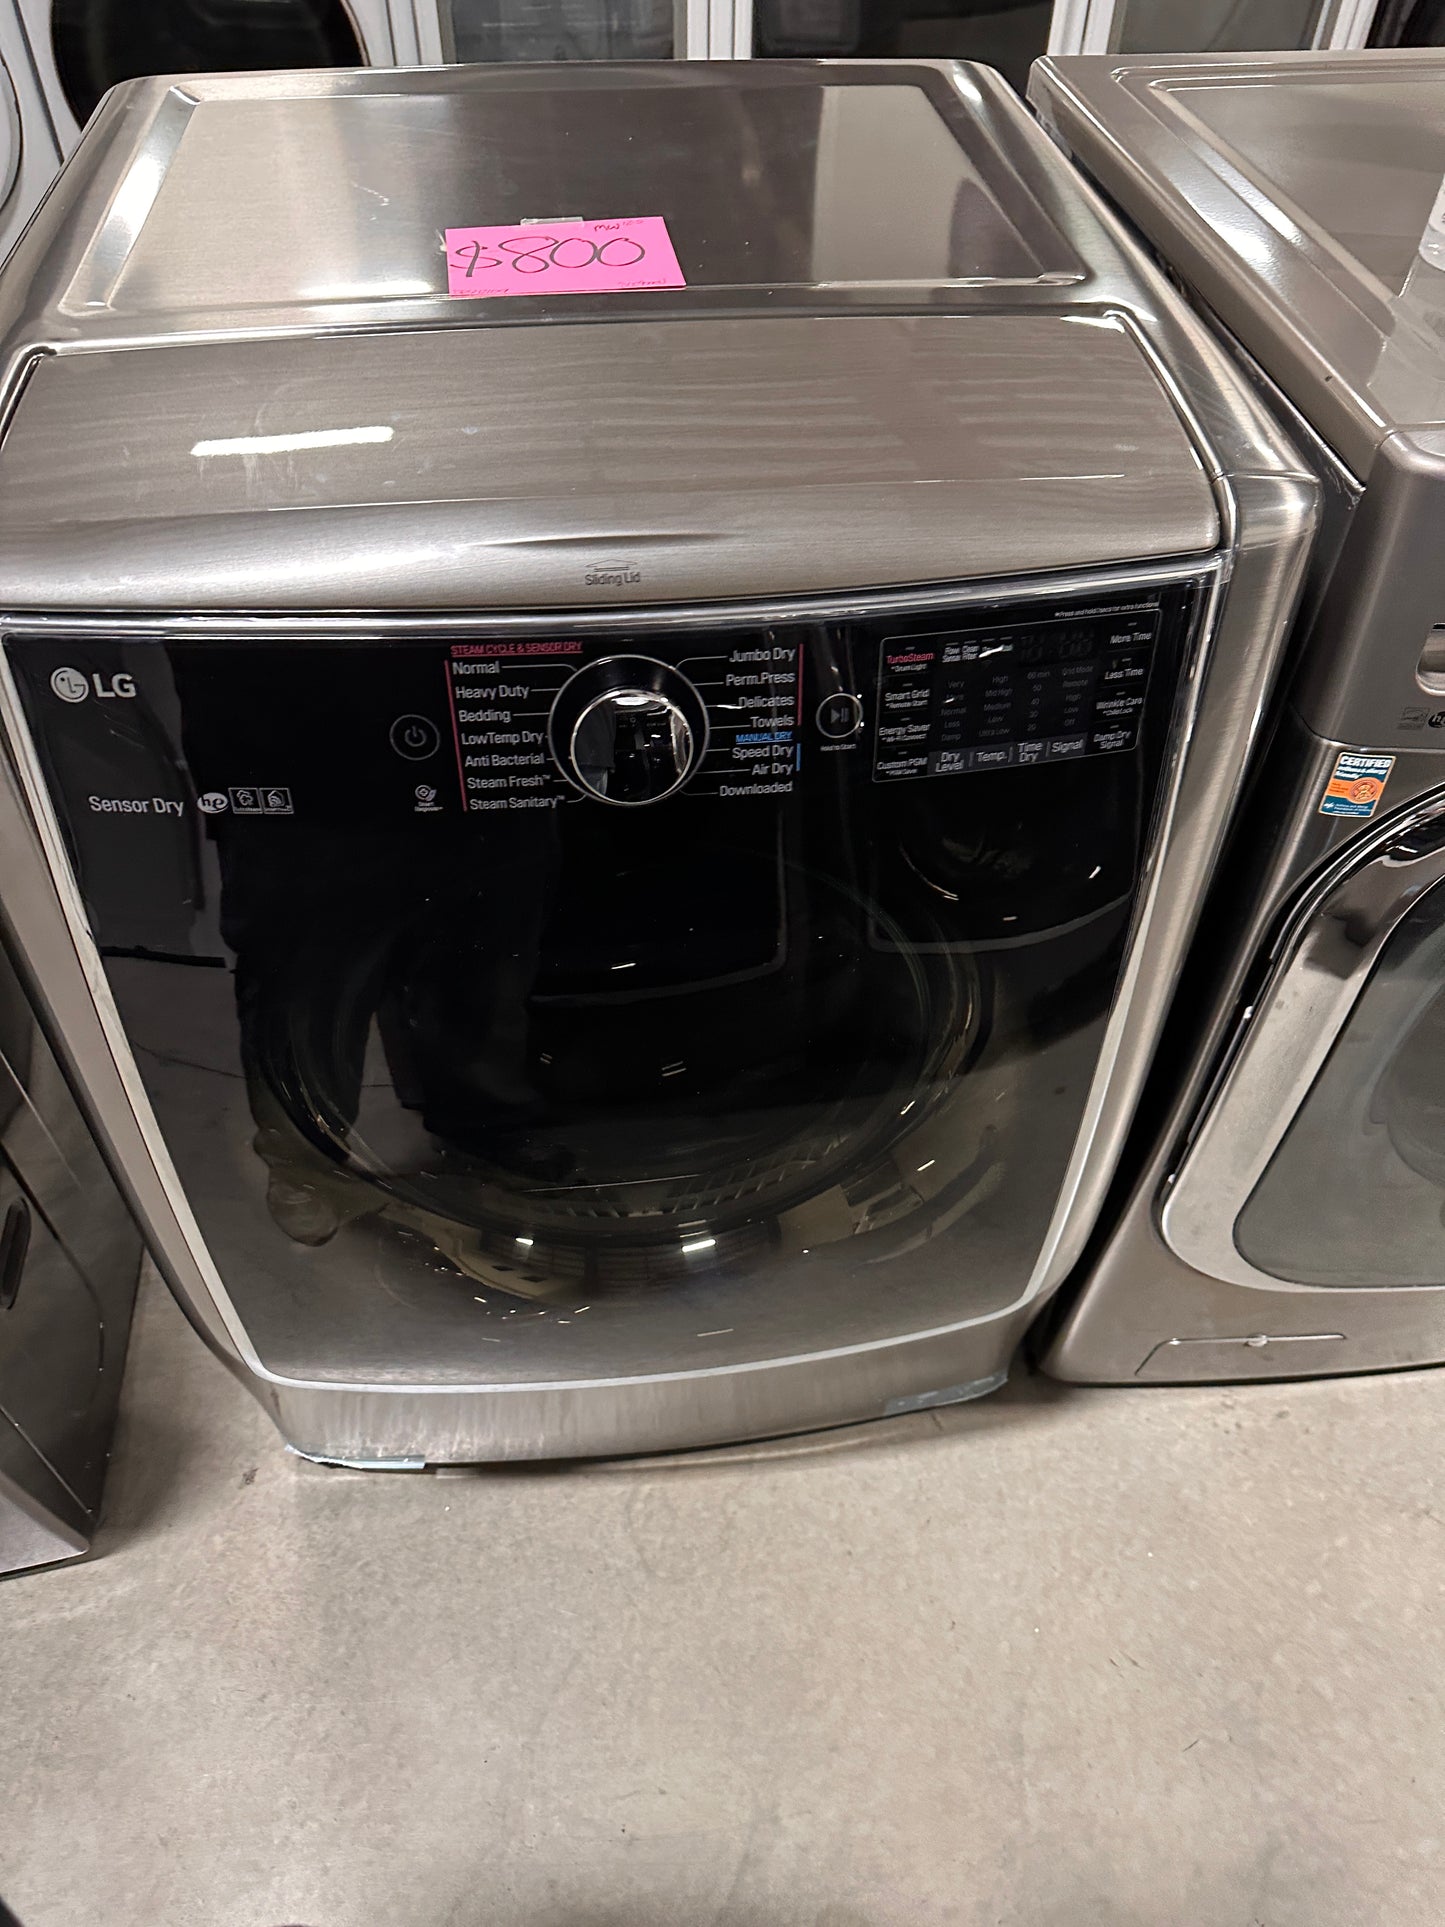 GREAT NEW LG SMART ELECTRIC DRYER - DRY12089